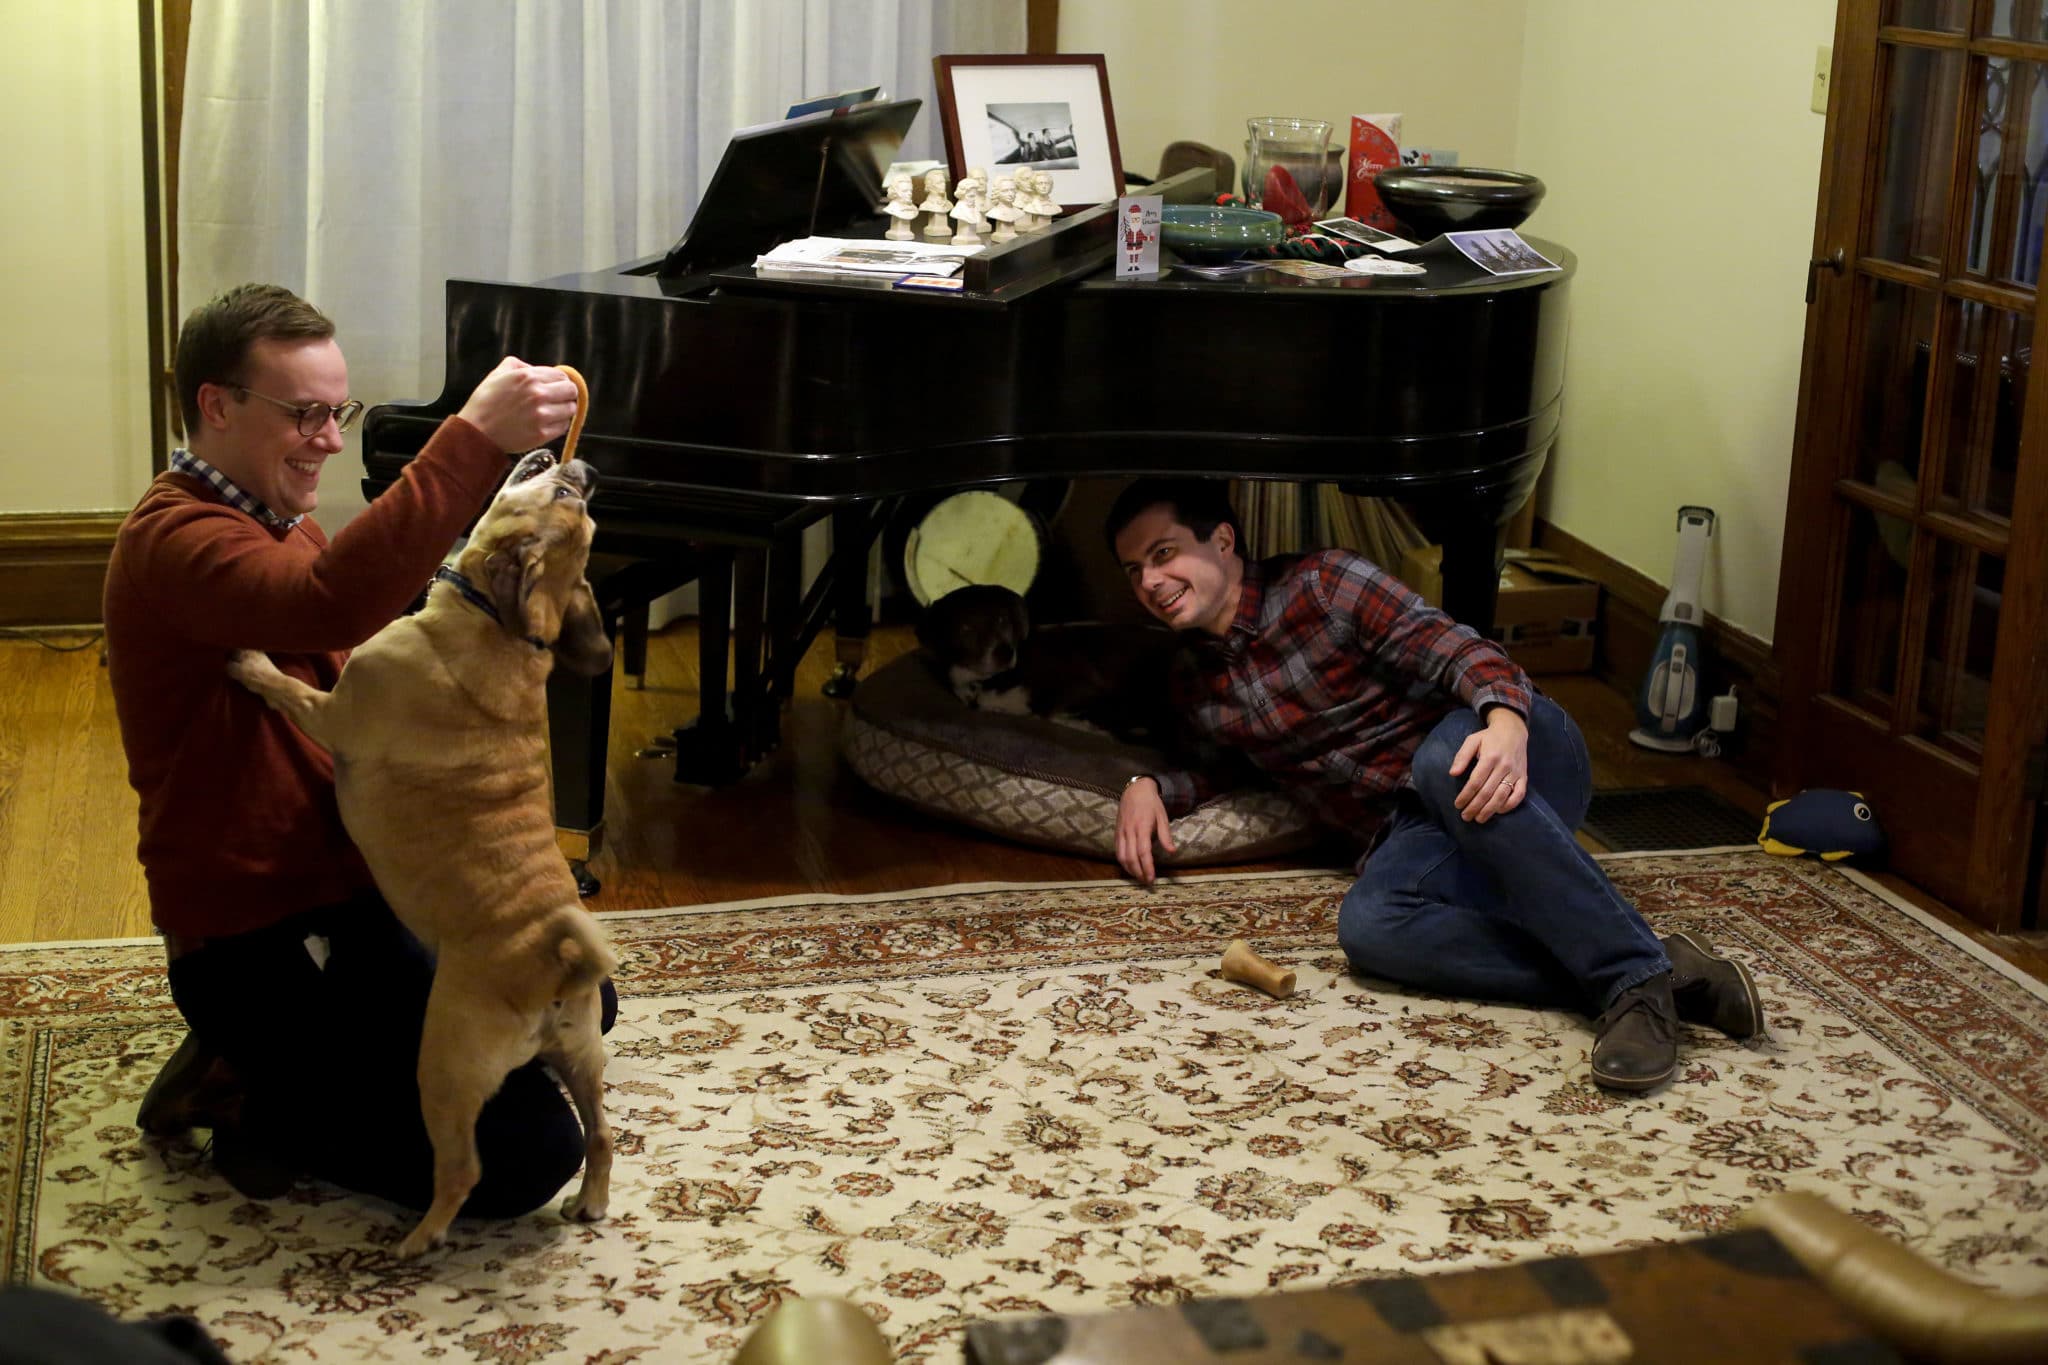 South Bend mayor Pete Buttigieg watches as his husband Chasten Glezman plays with their dog Buddy at their home on Tuesday 